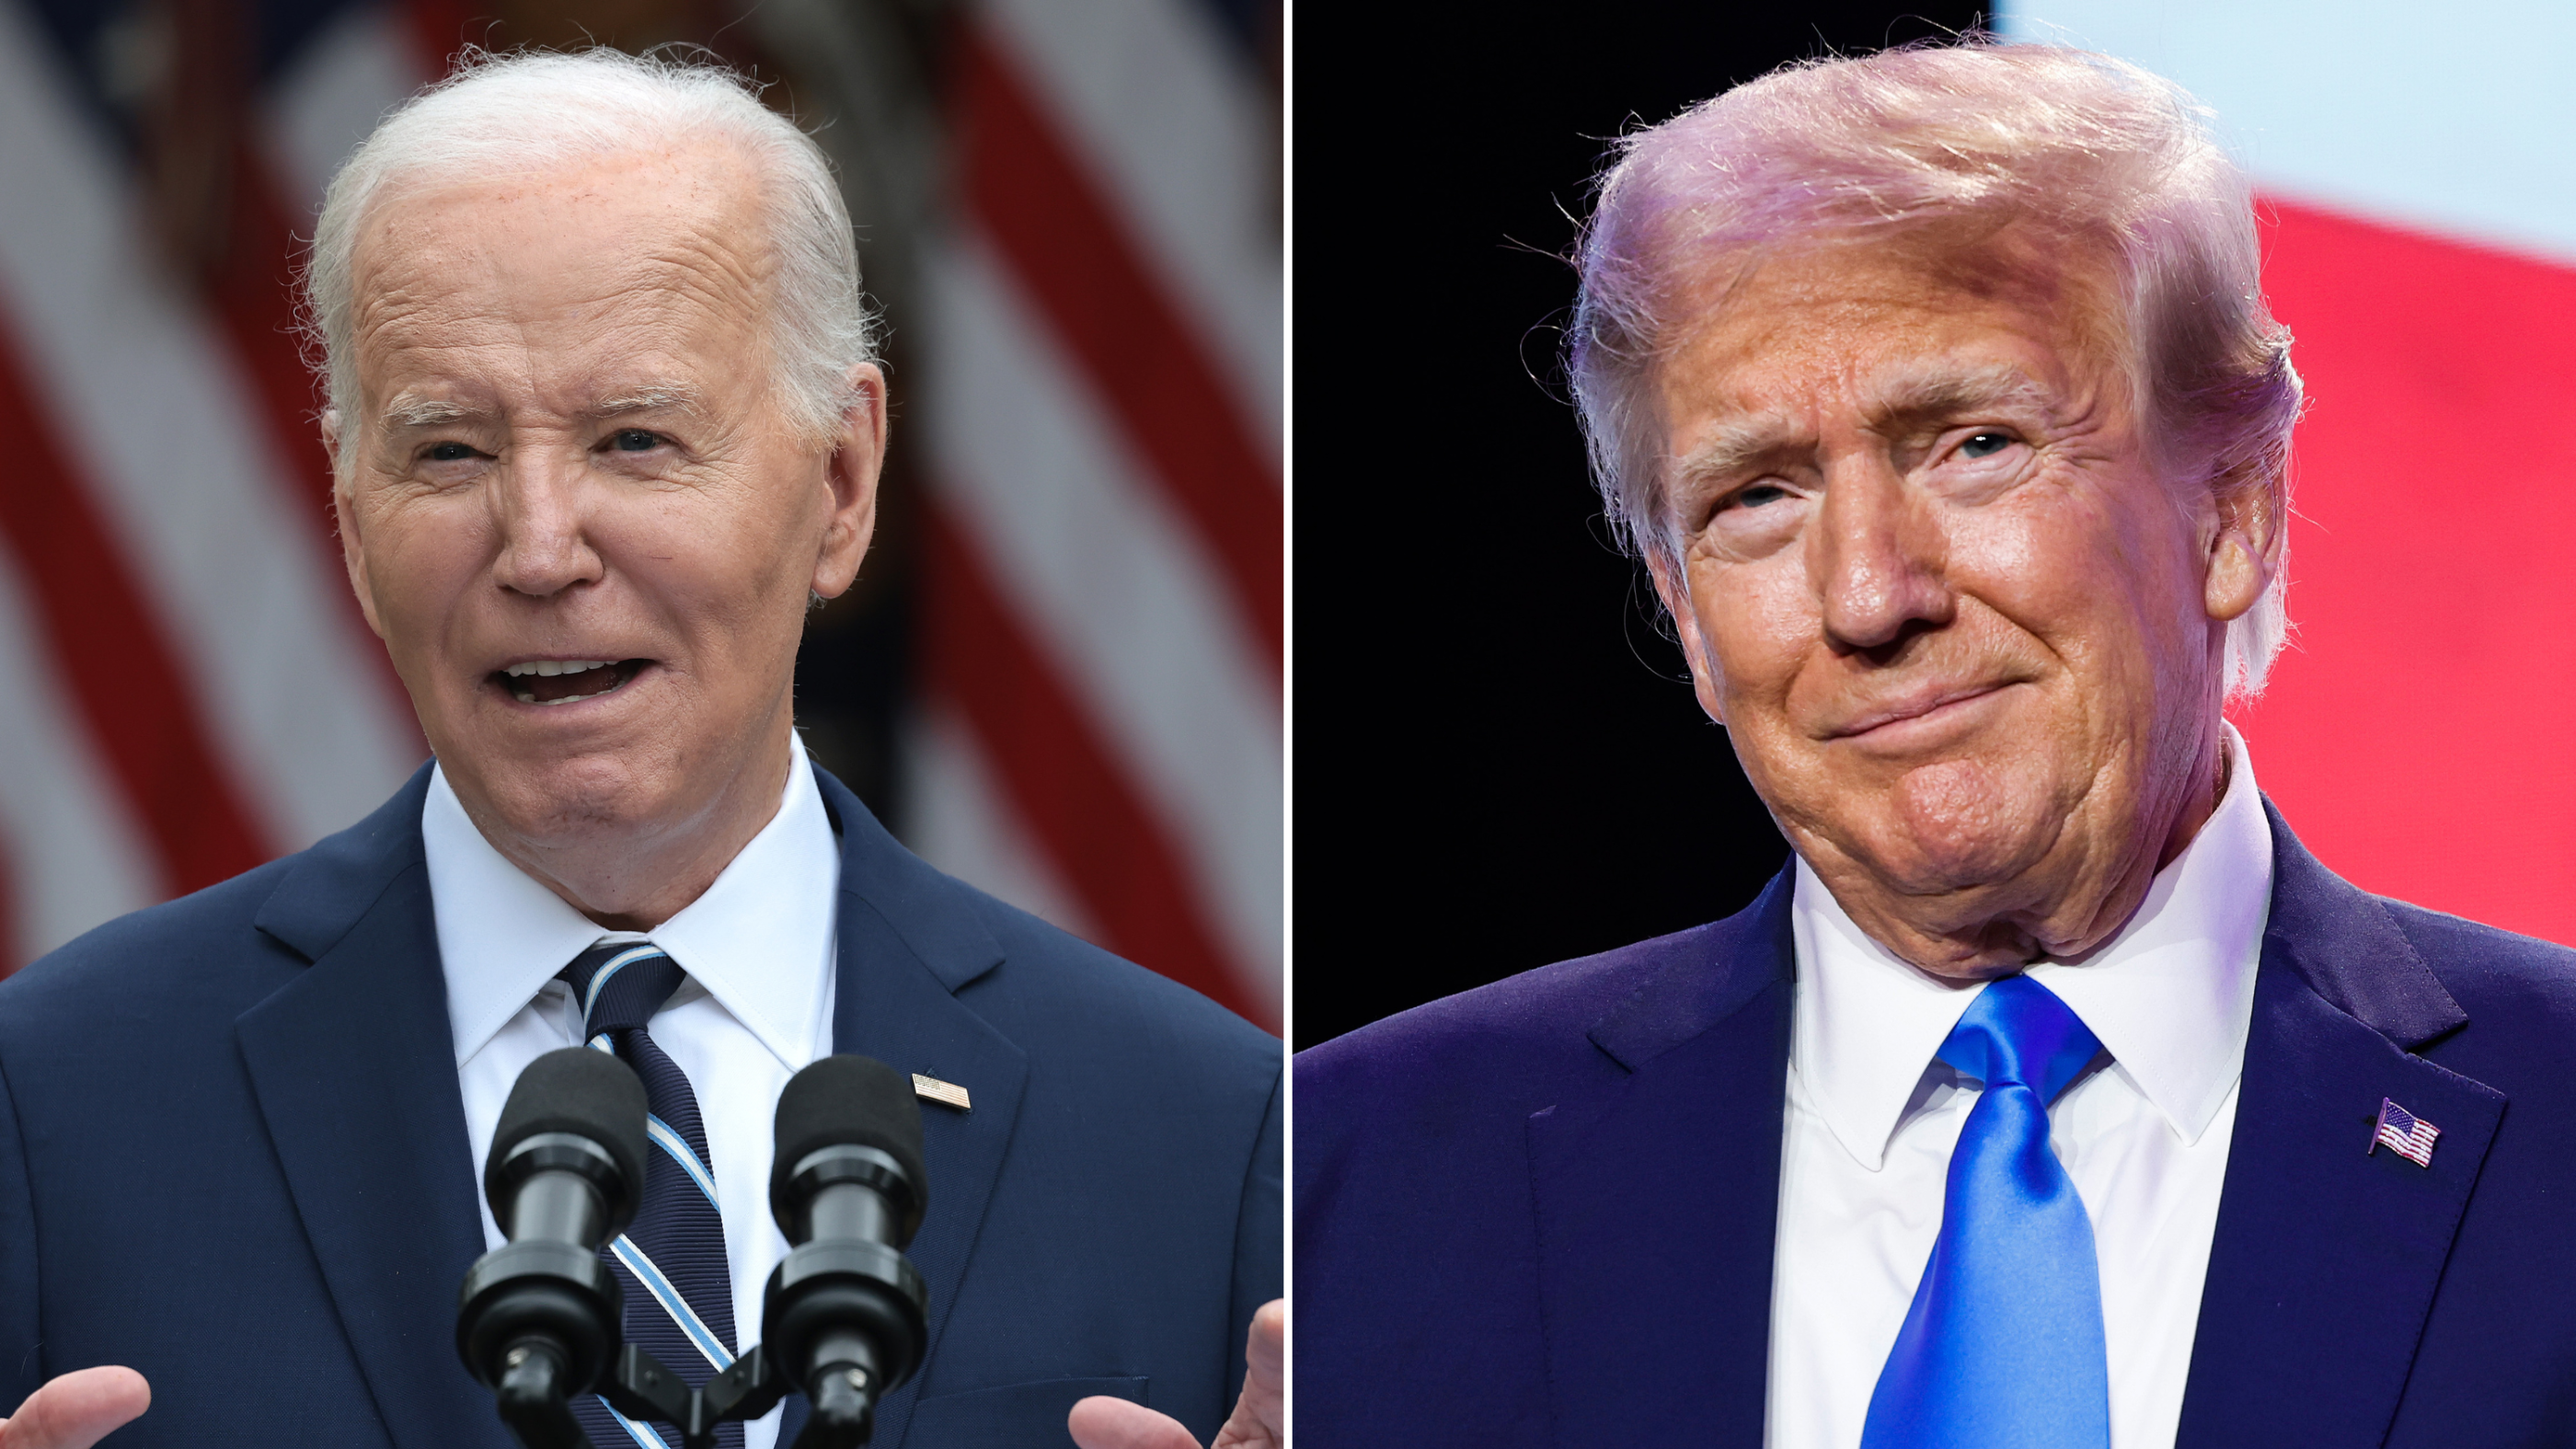 Why the Trump-Biden debates will be different, severe storms projected along Gulf Coast and the 'Young Sheldon' series finale